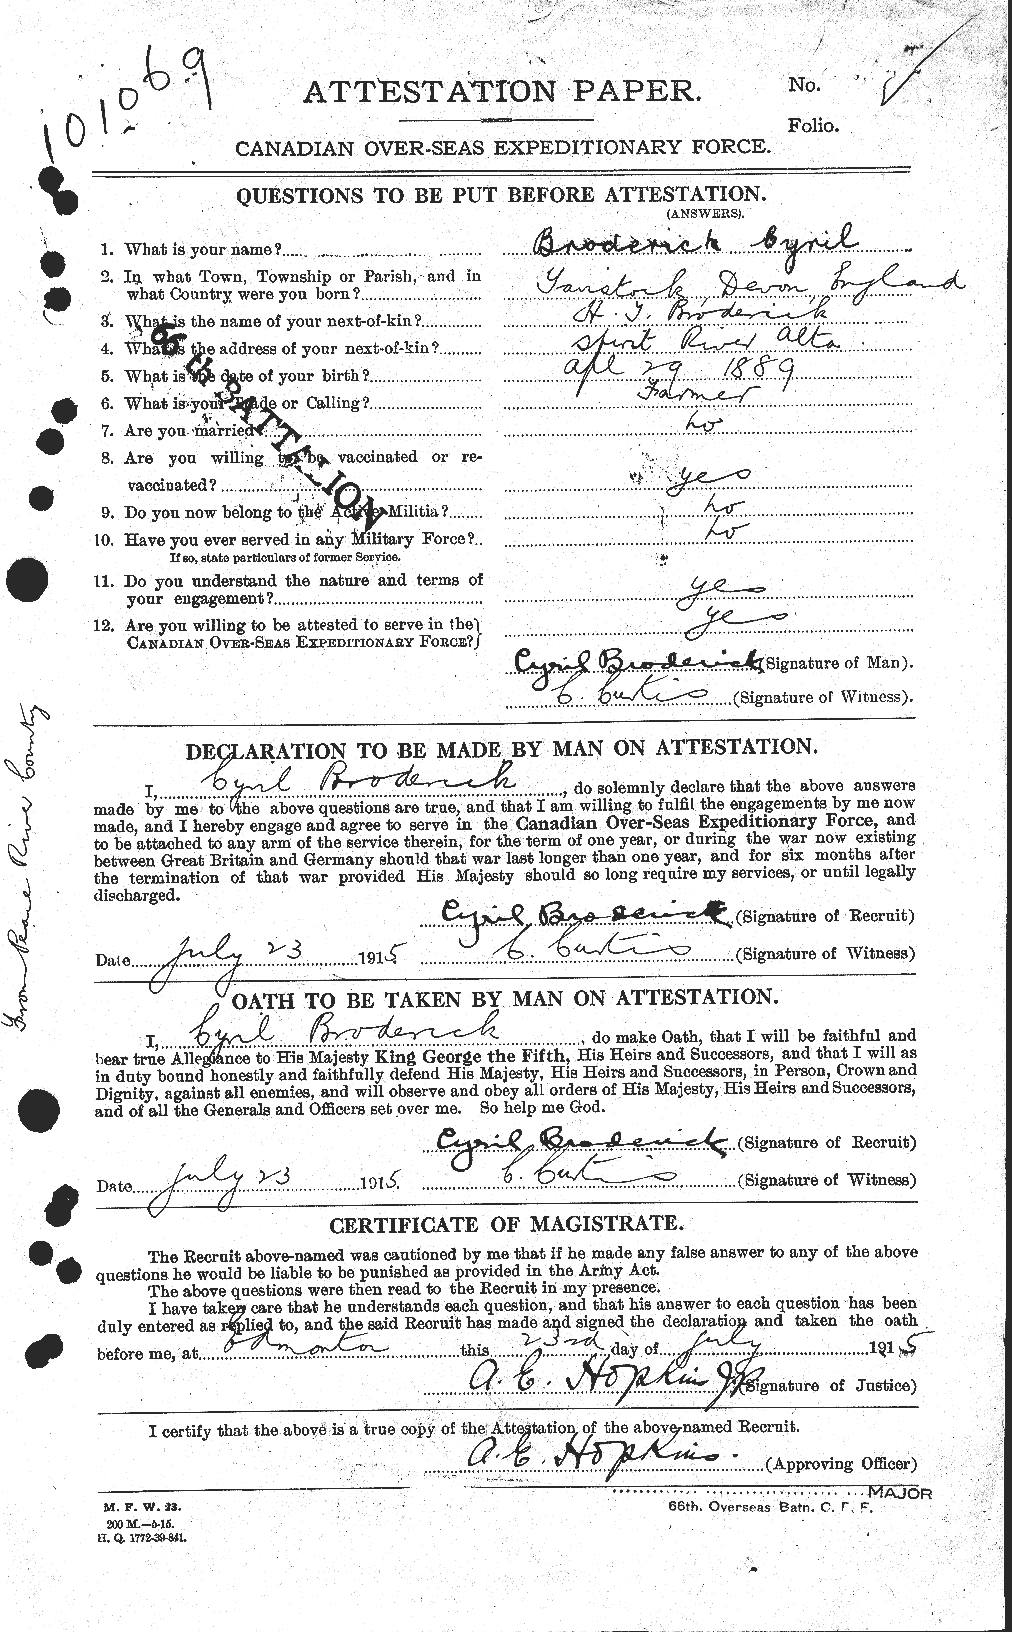 Personnel Records of the First World War - CEF 260967a